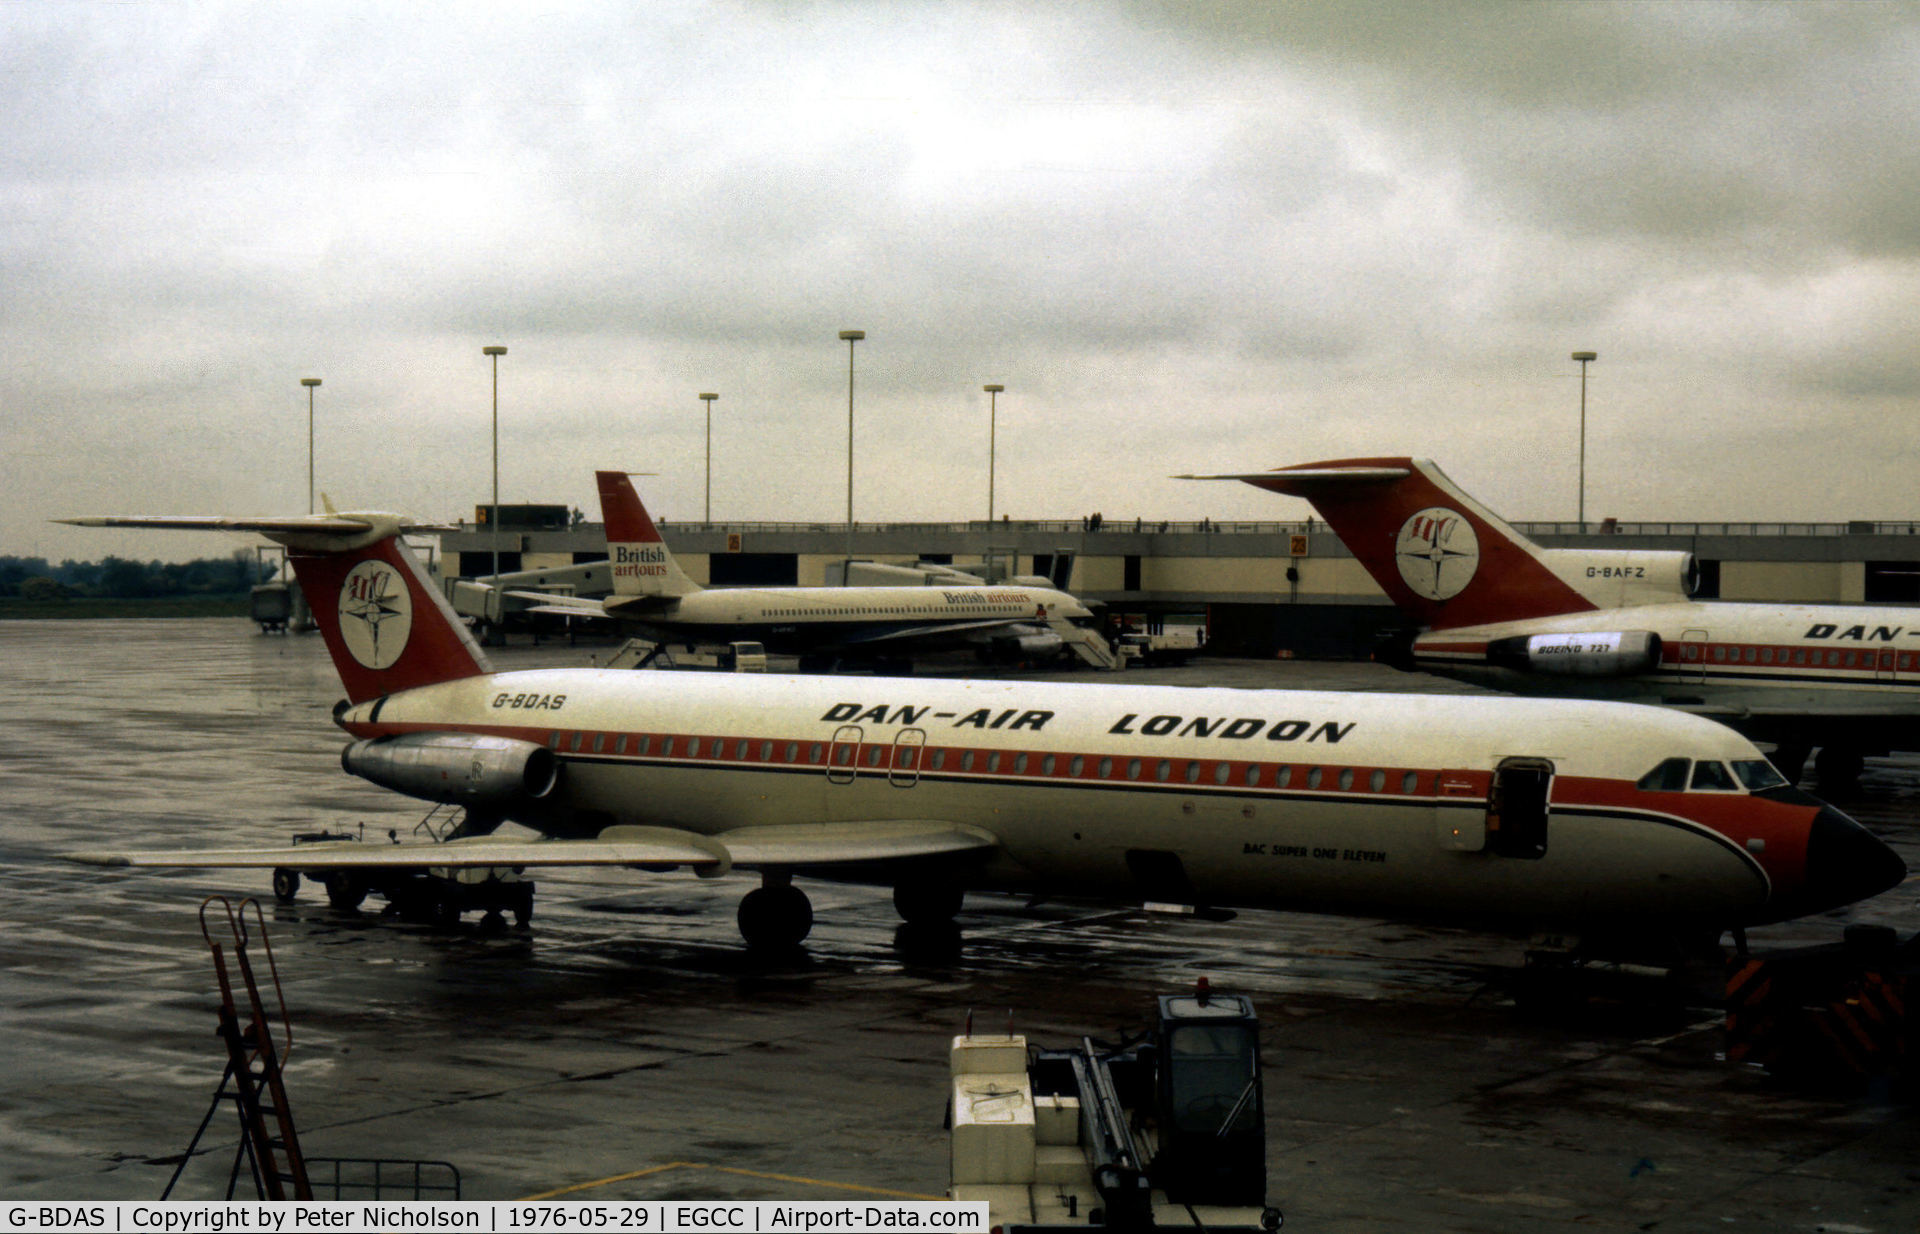 G-BDAS, 1969 BAC 111-518FG One-Eleven C/N BAC.202, One Eleven 518 of Dan-Air as seen at Manchester in the Summer of 1976.